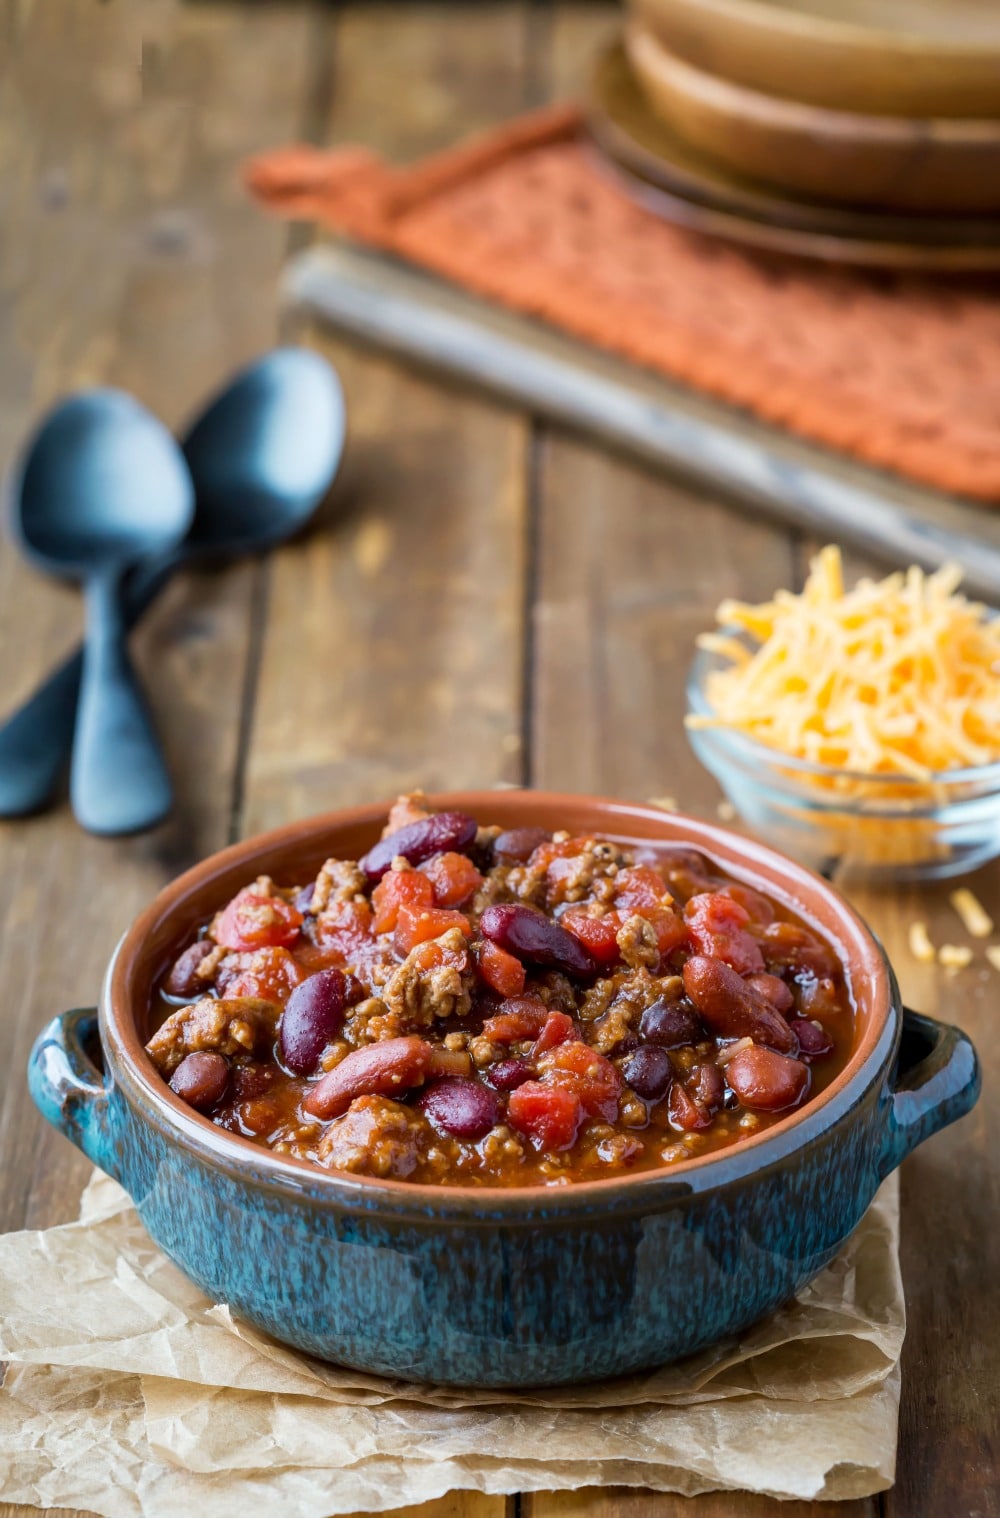 Barbecue Chili in a blue dish next to spoons and a dish of cheese